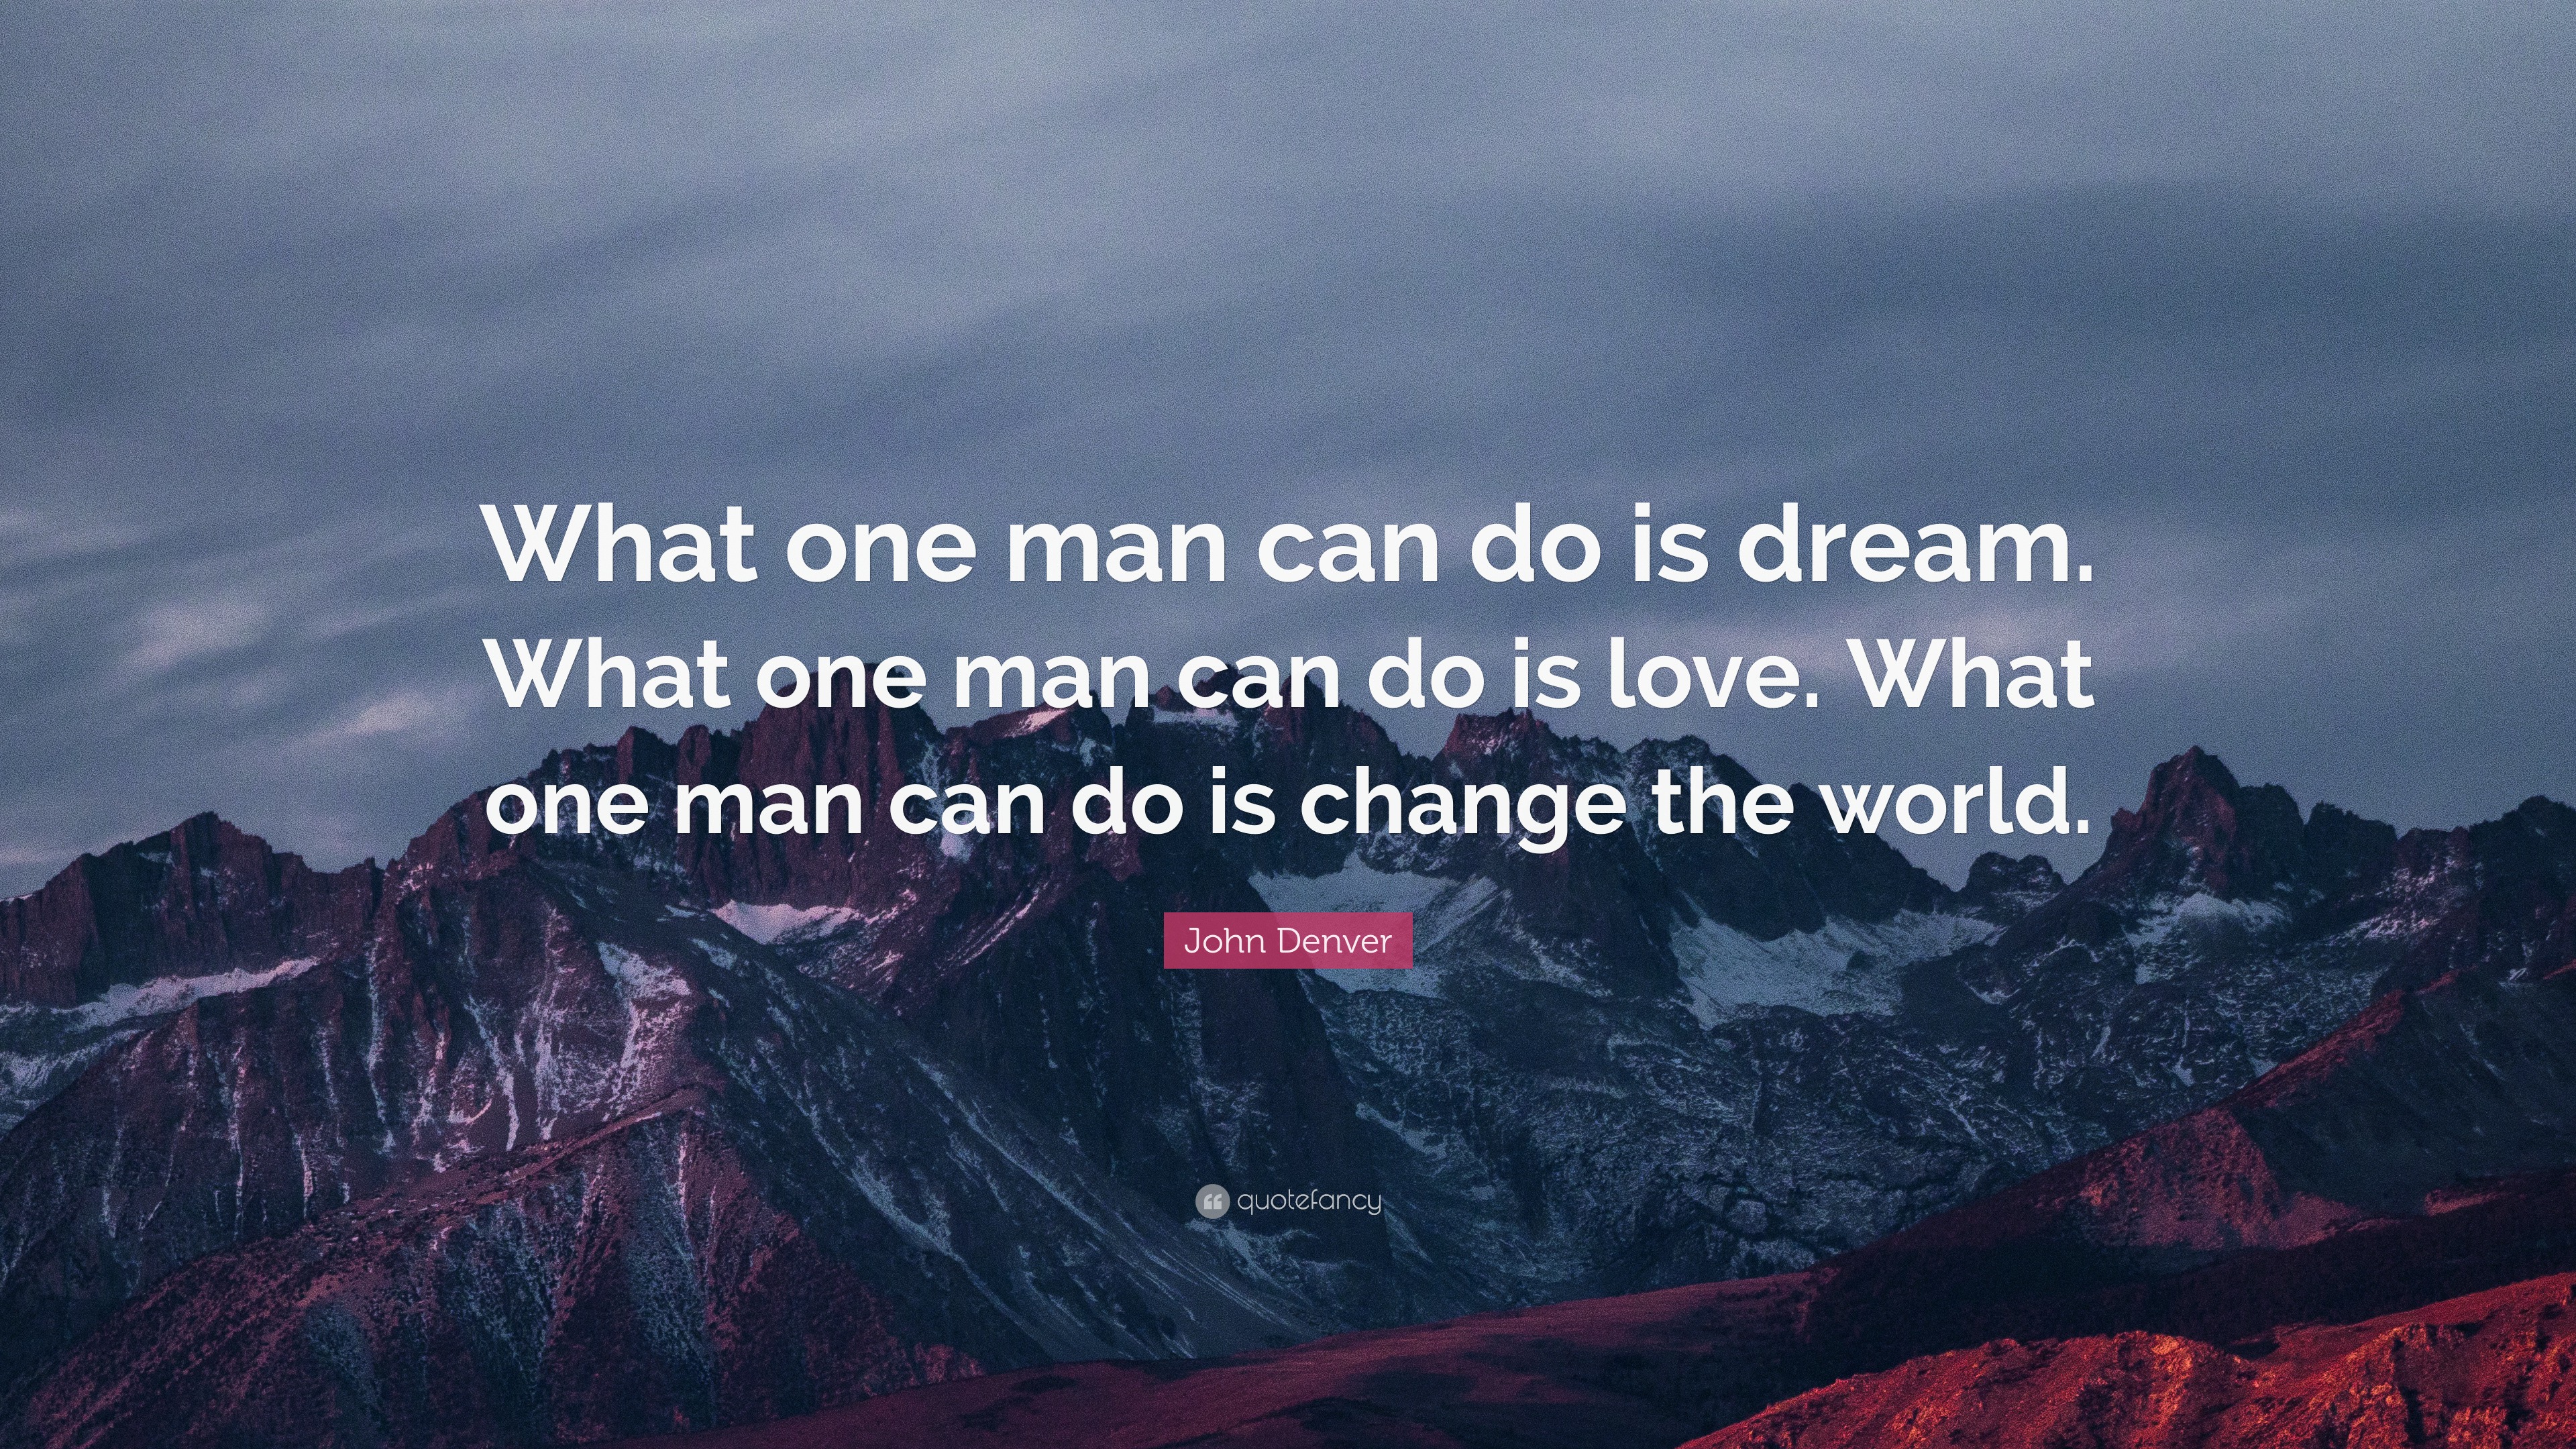 4323012-John-Denver-Quote-What-one-man-can-do-is-dream-What-one-man-can-do.jpg